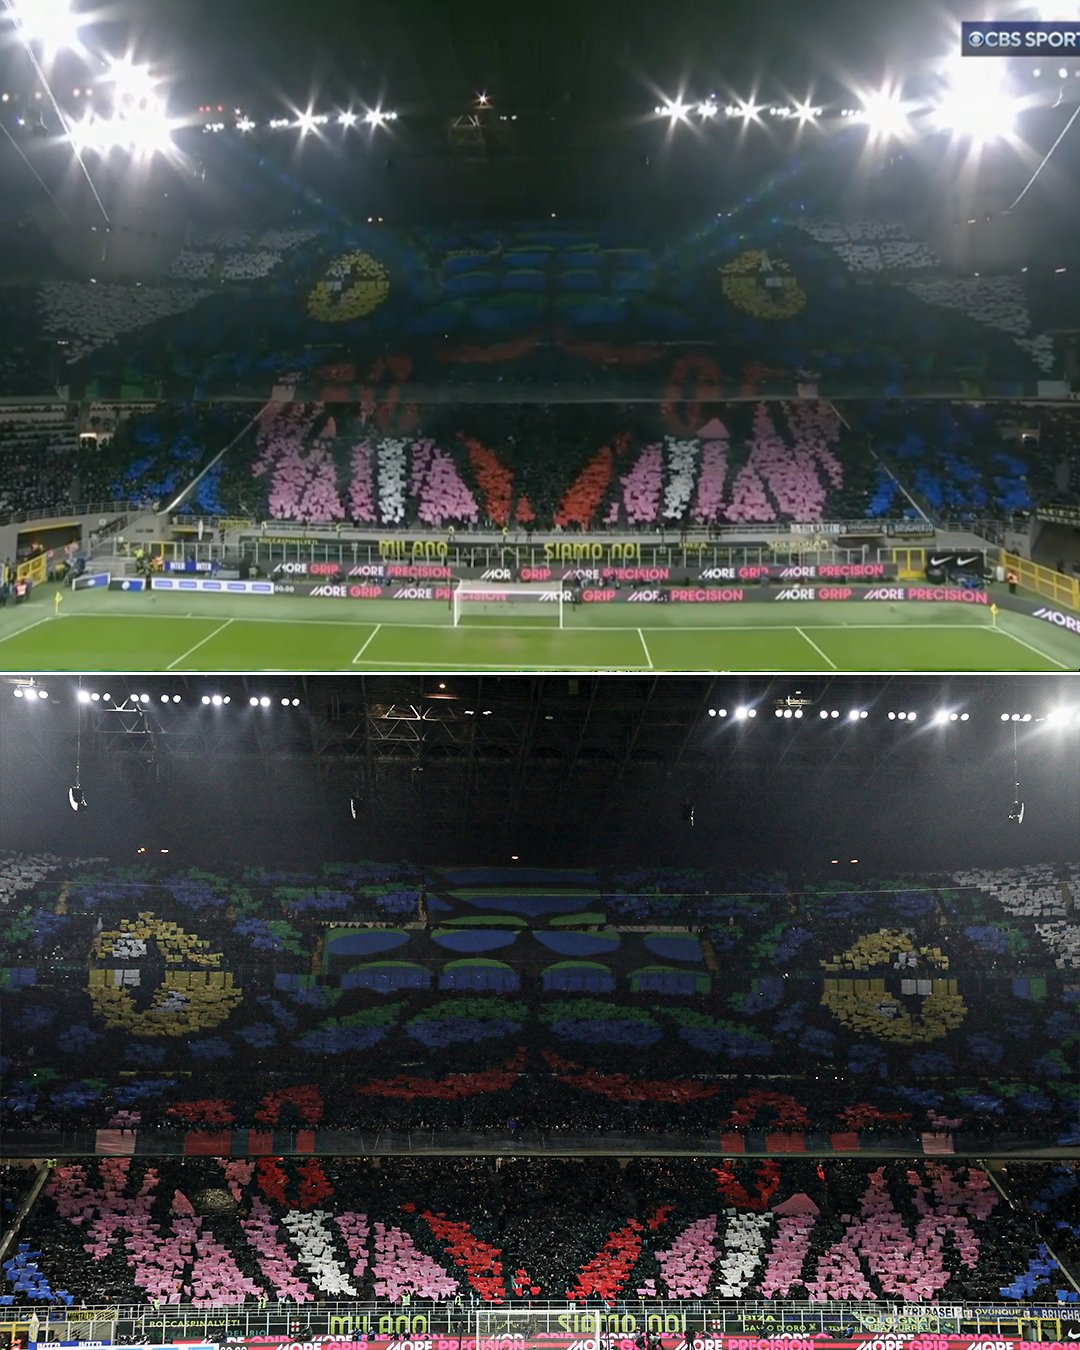 FC on Twitter: "Inter fans displayed this tifo ahead of the Derby della today 🔥 One of the best we've seen this season 🐍 https://t.co/Lrjp8tFboj" / Twitter